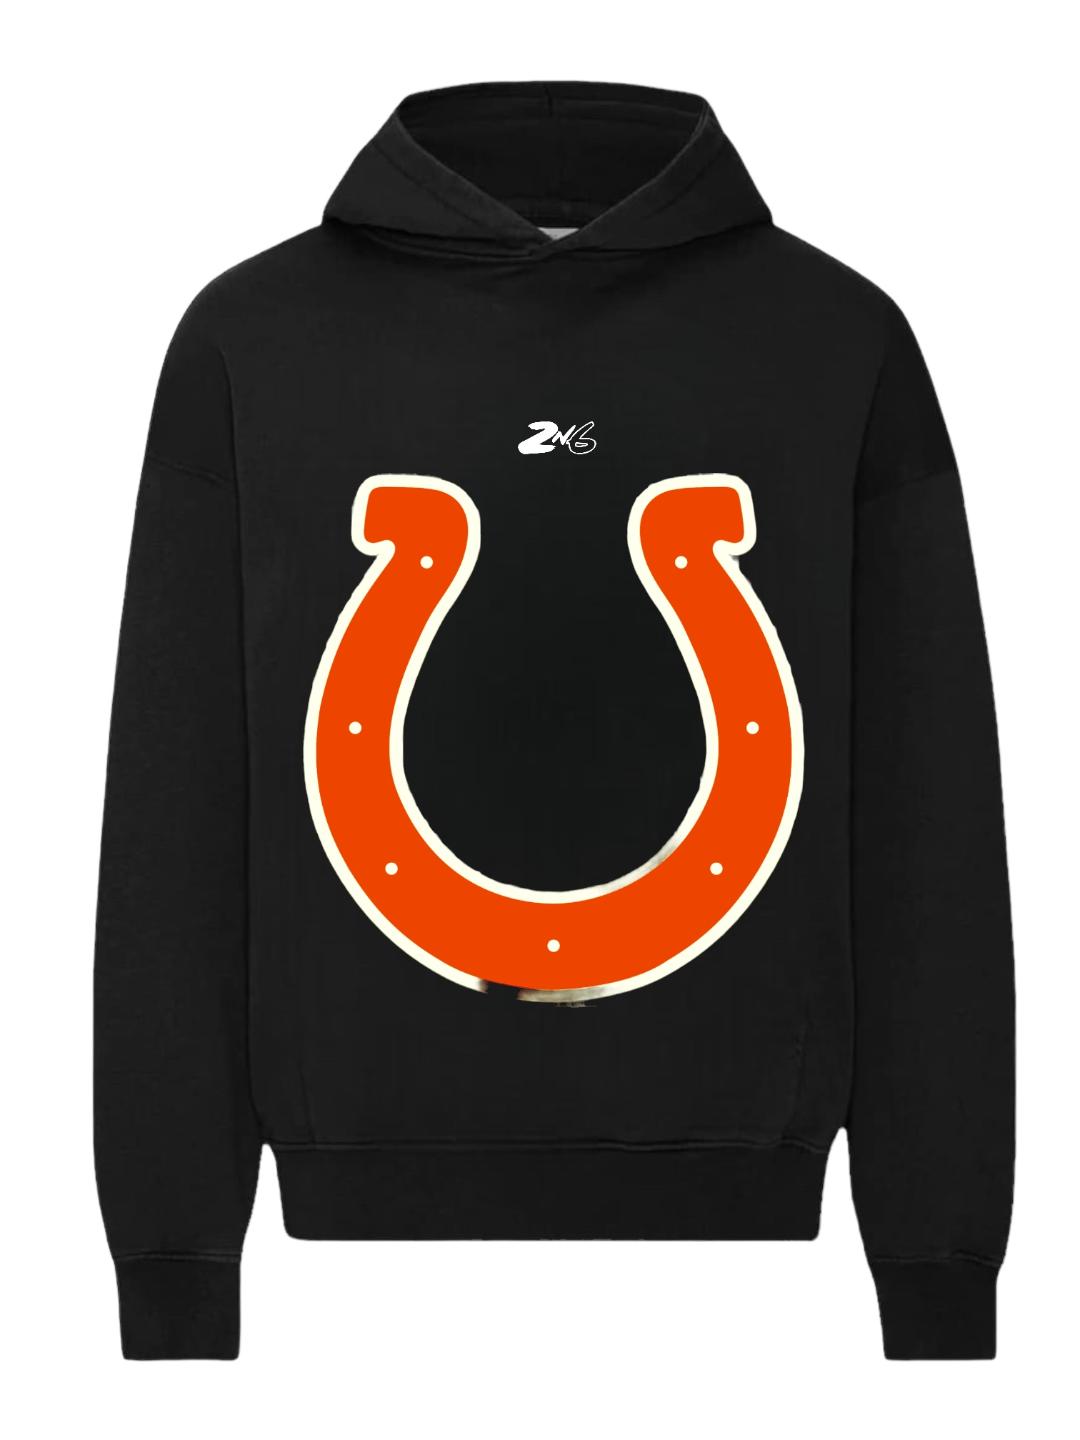 Limited Edition Coolidge Colts Gravy Bowl Hoodie